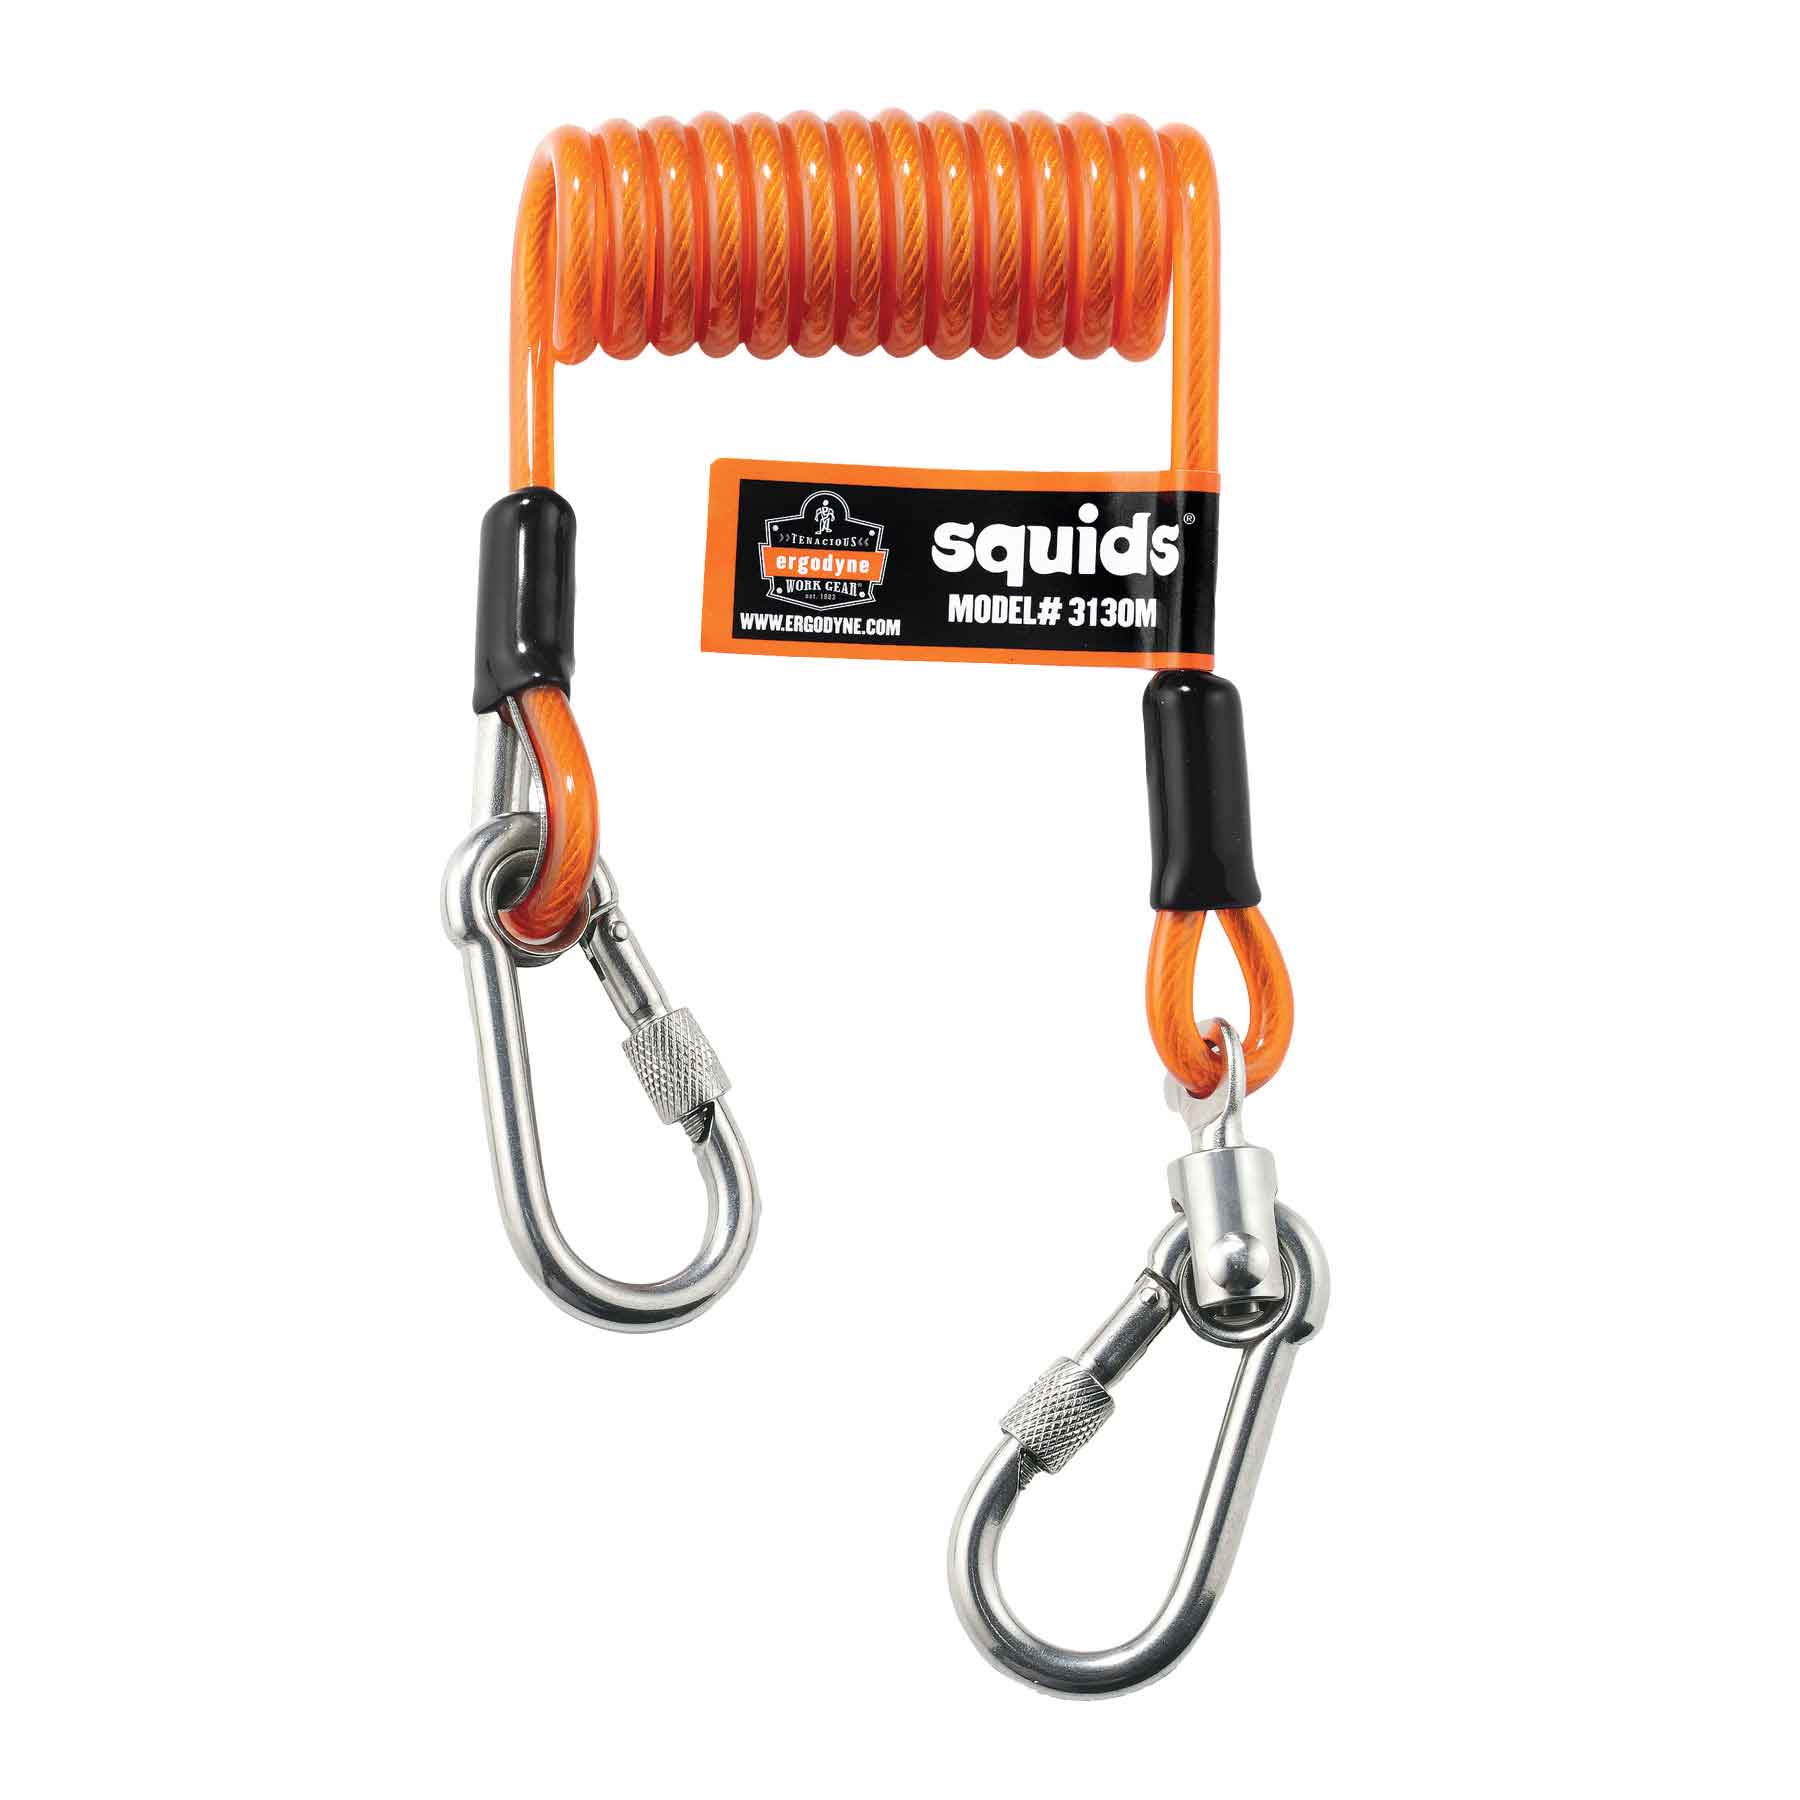 LANYARD TOOL COILED CABLE SS CARABINER HOOKS 6